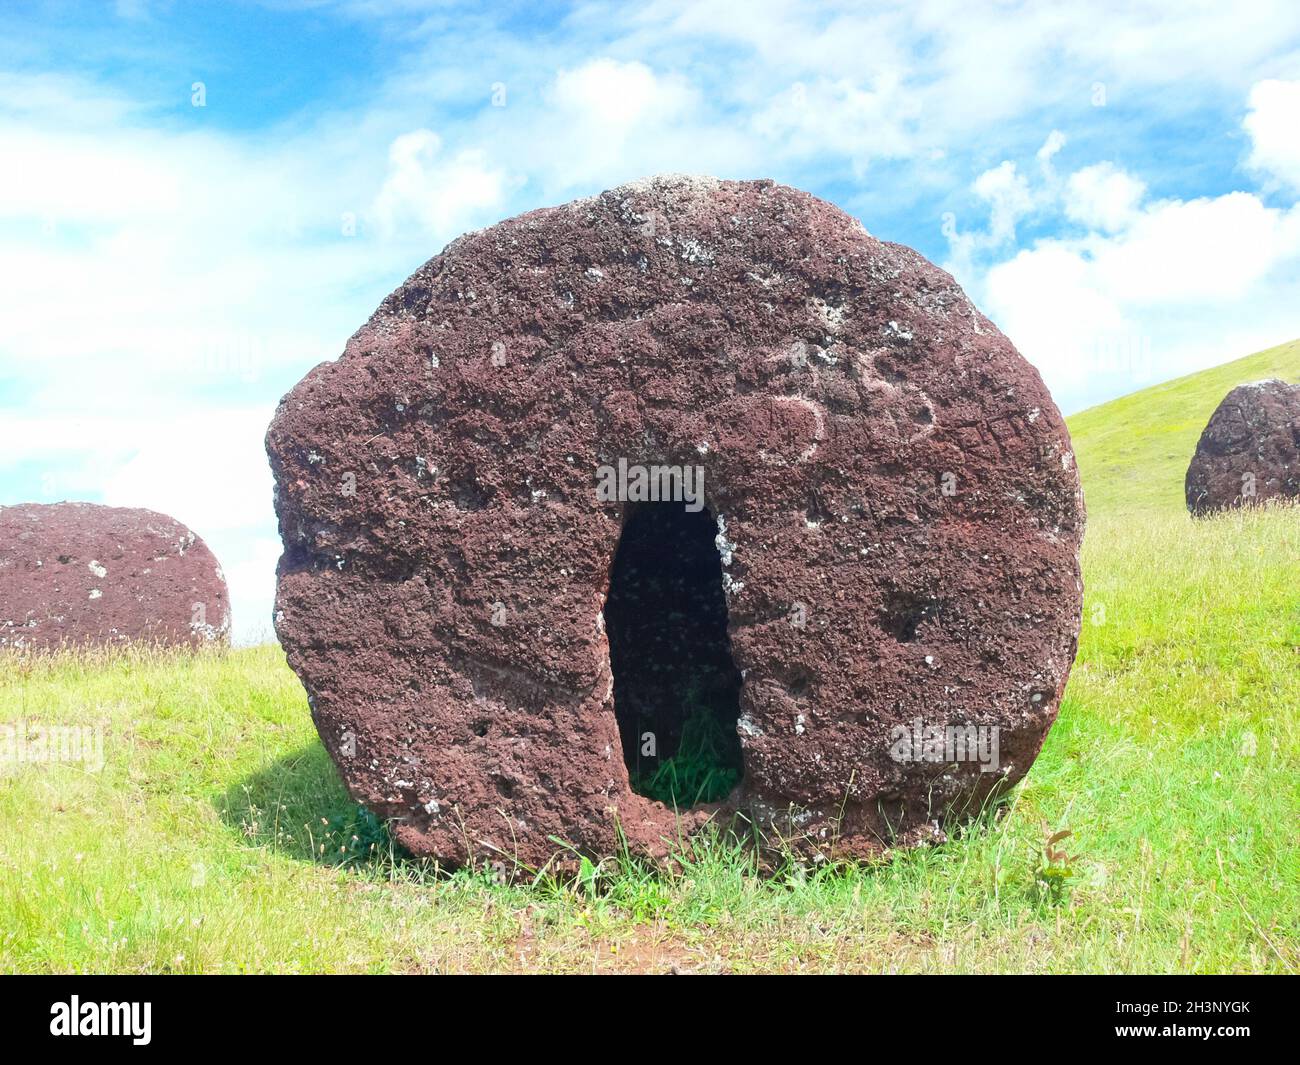 Tachyllite tuff stones, material from which the statues of Easter Island were made. Stock Photo